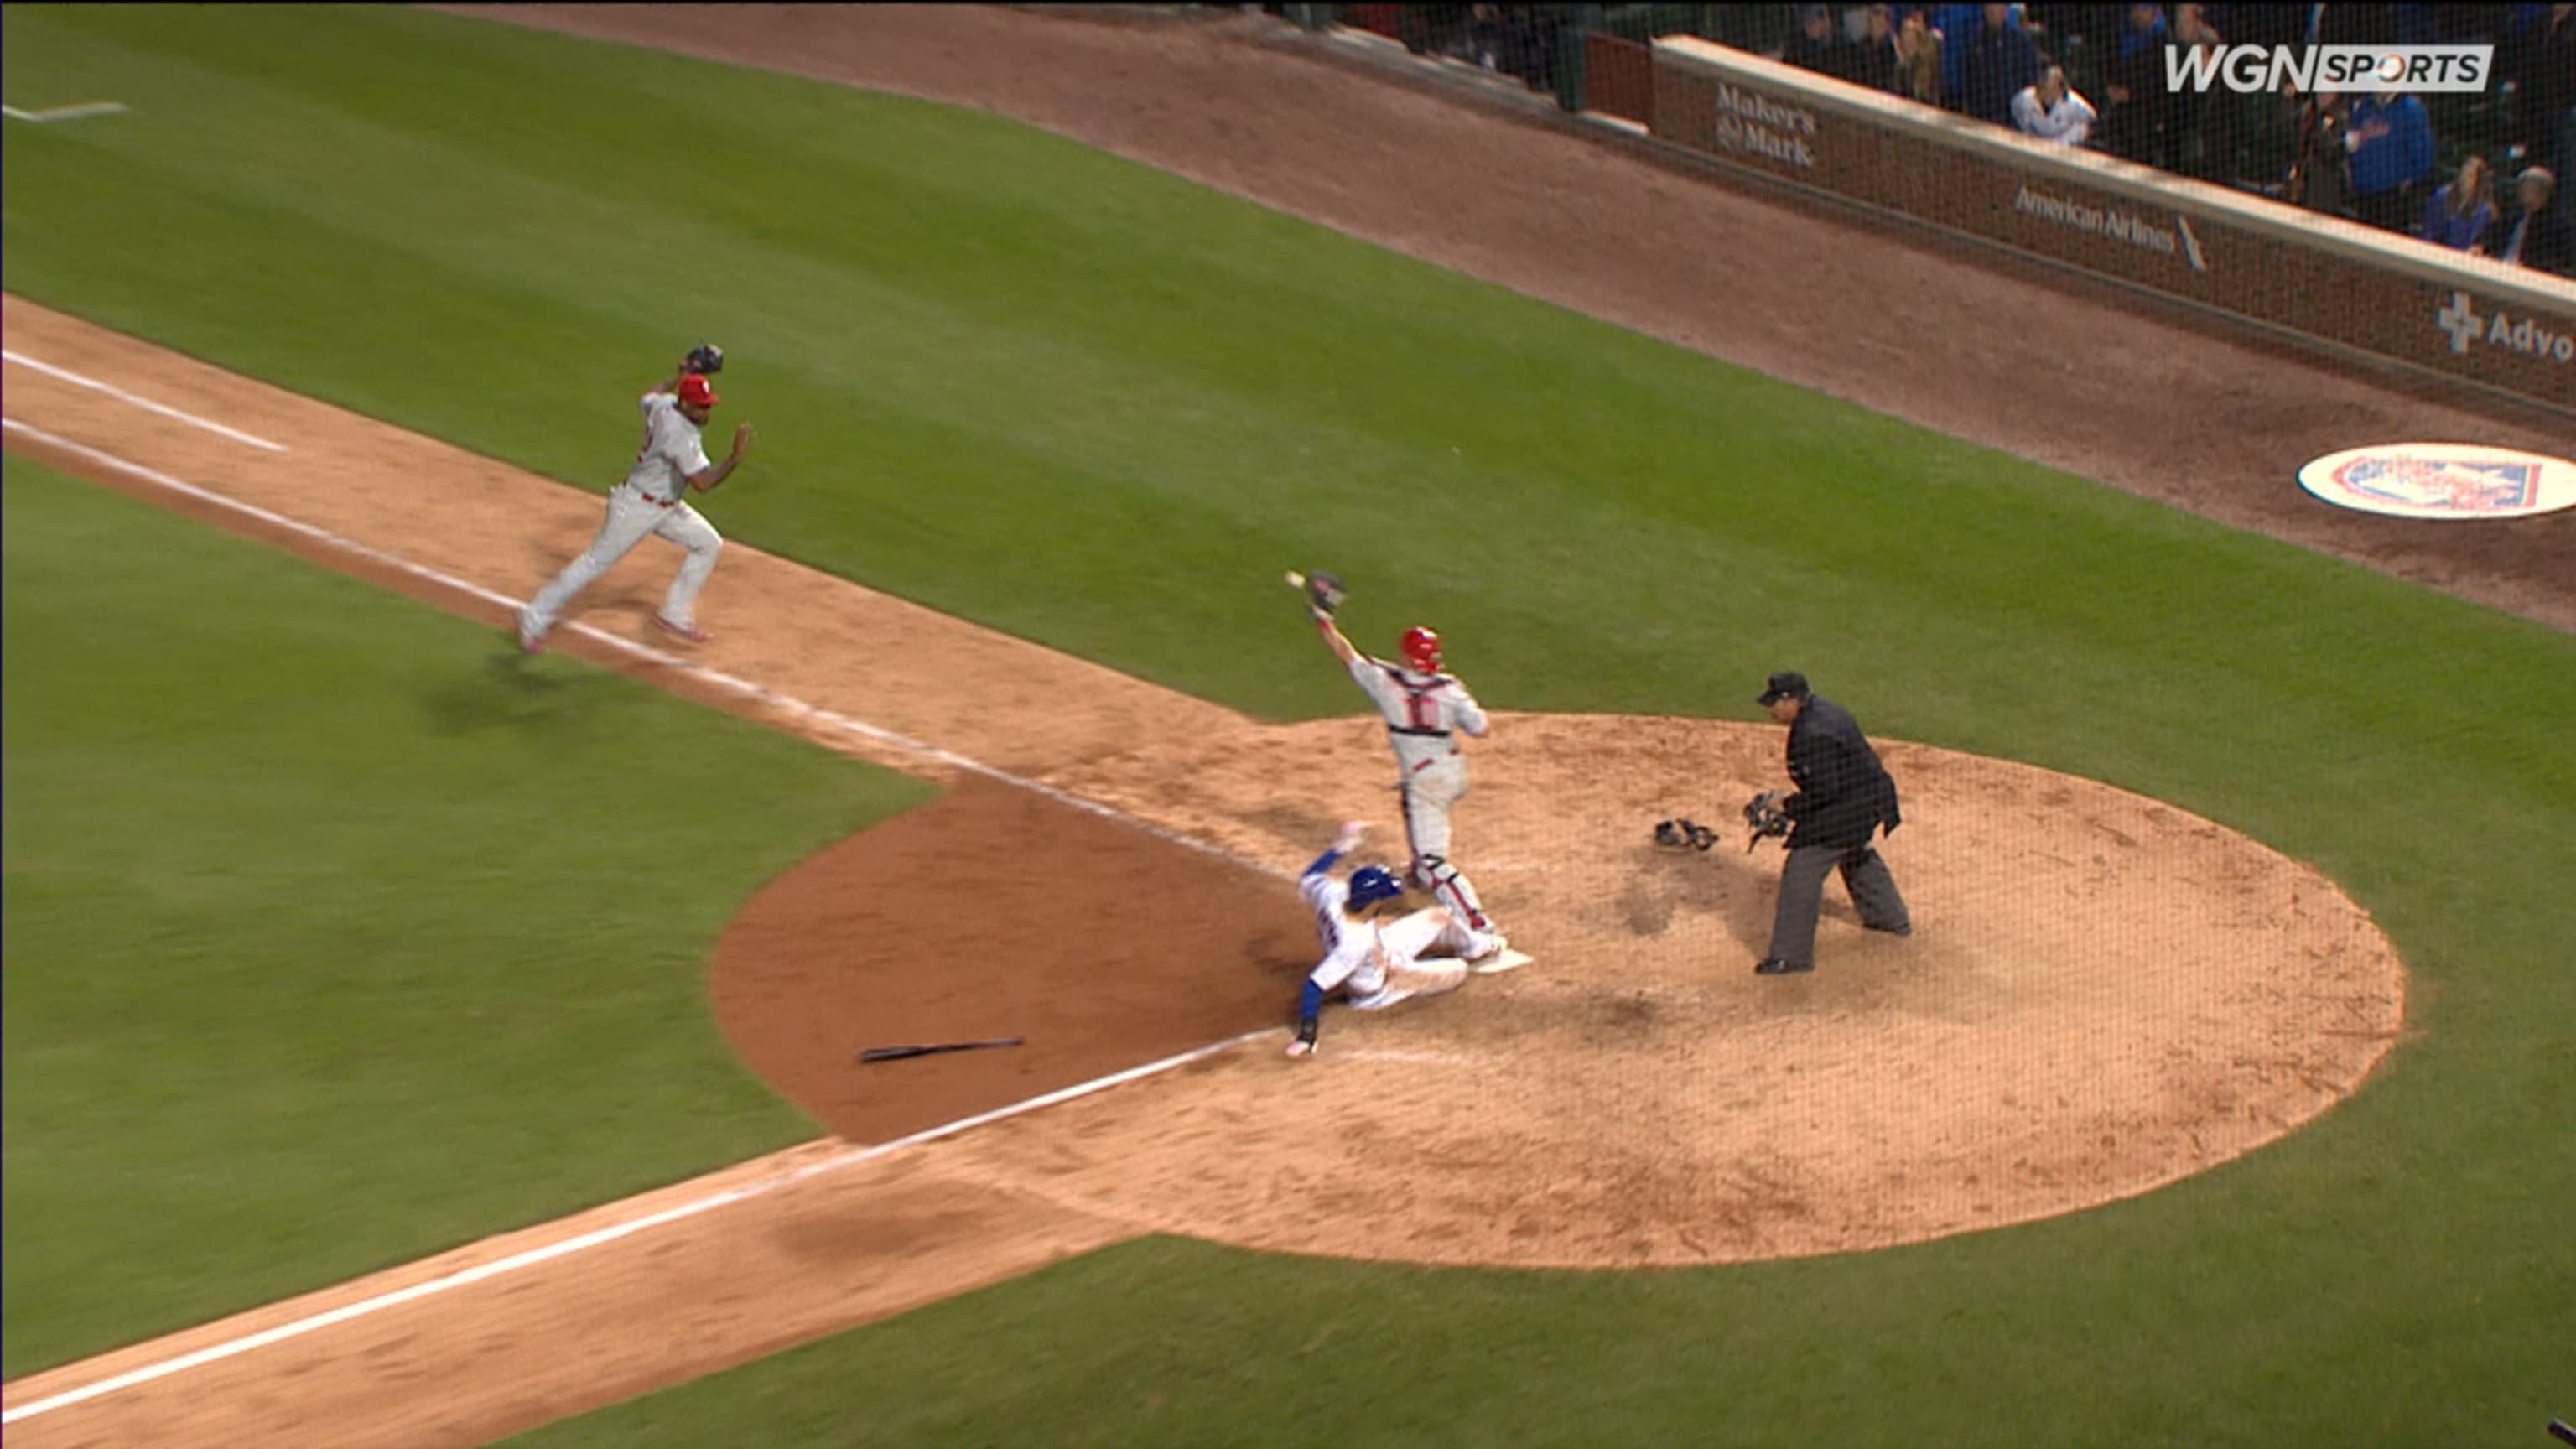 Chicago Cubs Javier Baez hits a ball flubbed by Washington